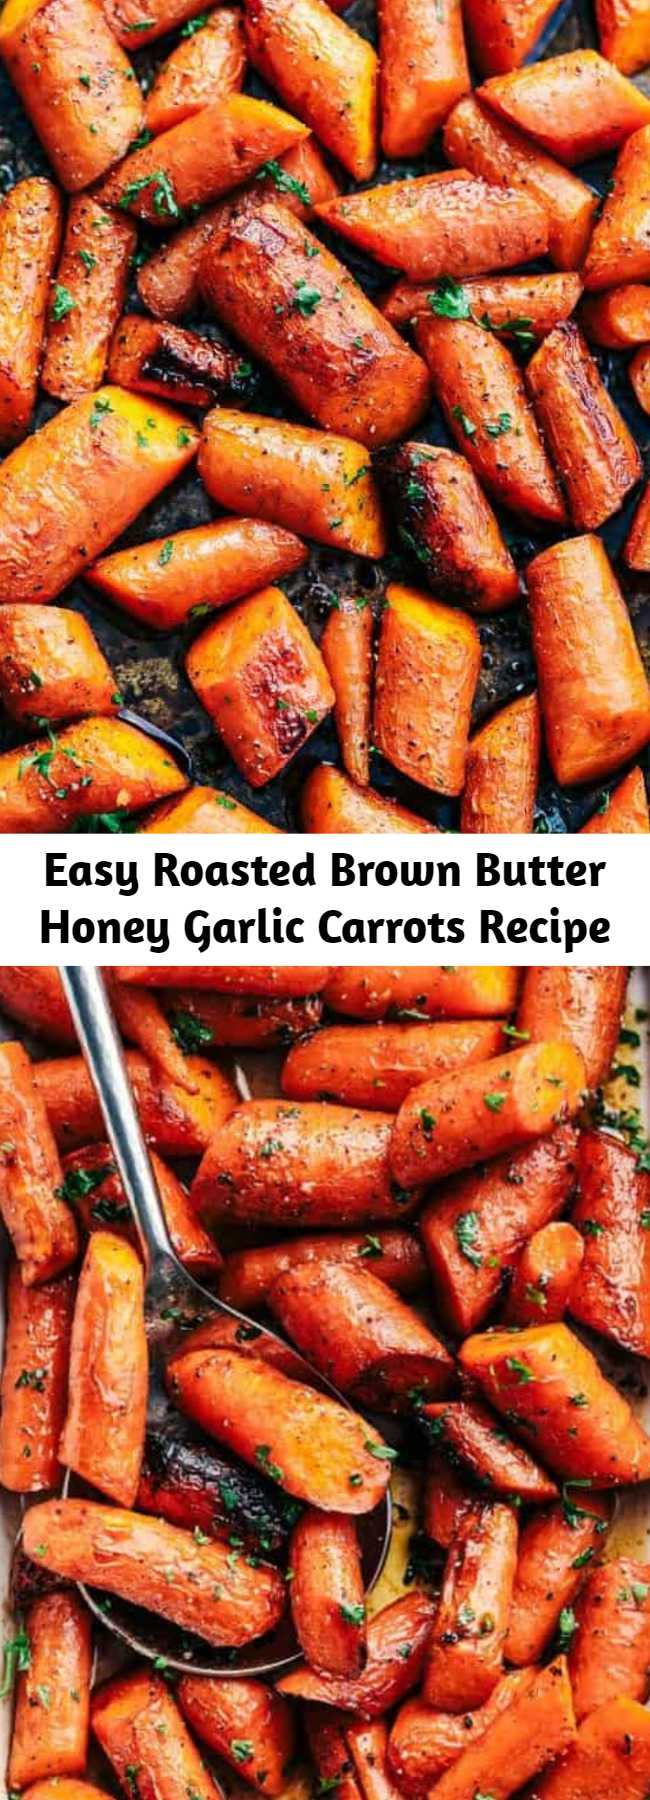 Easy Roasted Brown Butter Honey Garlic Carrots Recipe - Roasted Brown Butter Honey Garlic Carrots make an excellent side dish. Roasted to tender perfection in the most incredible brown butter honey garlic sauce these will become a new favorite!